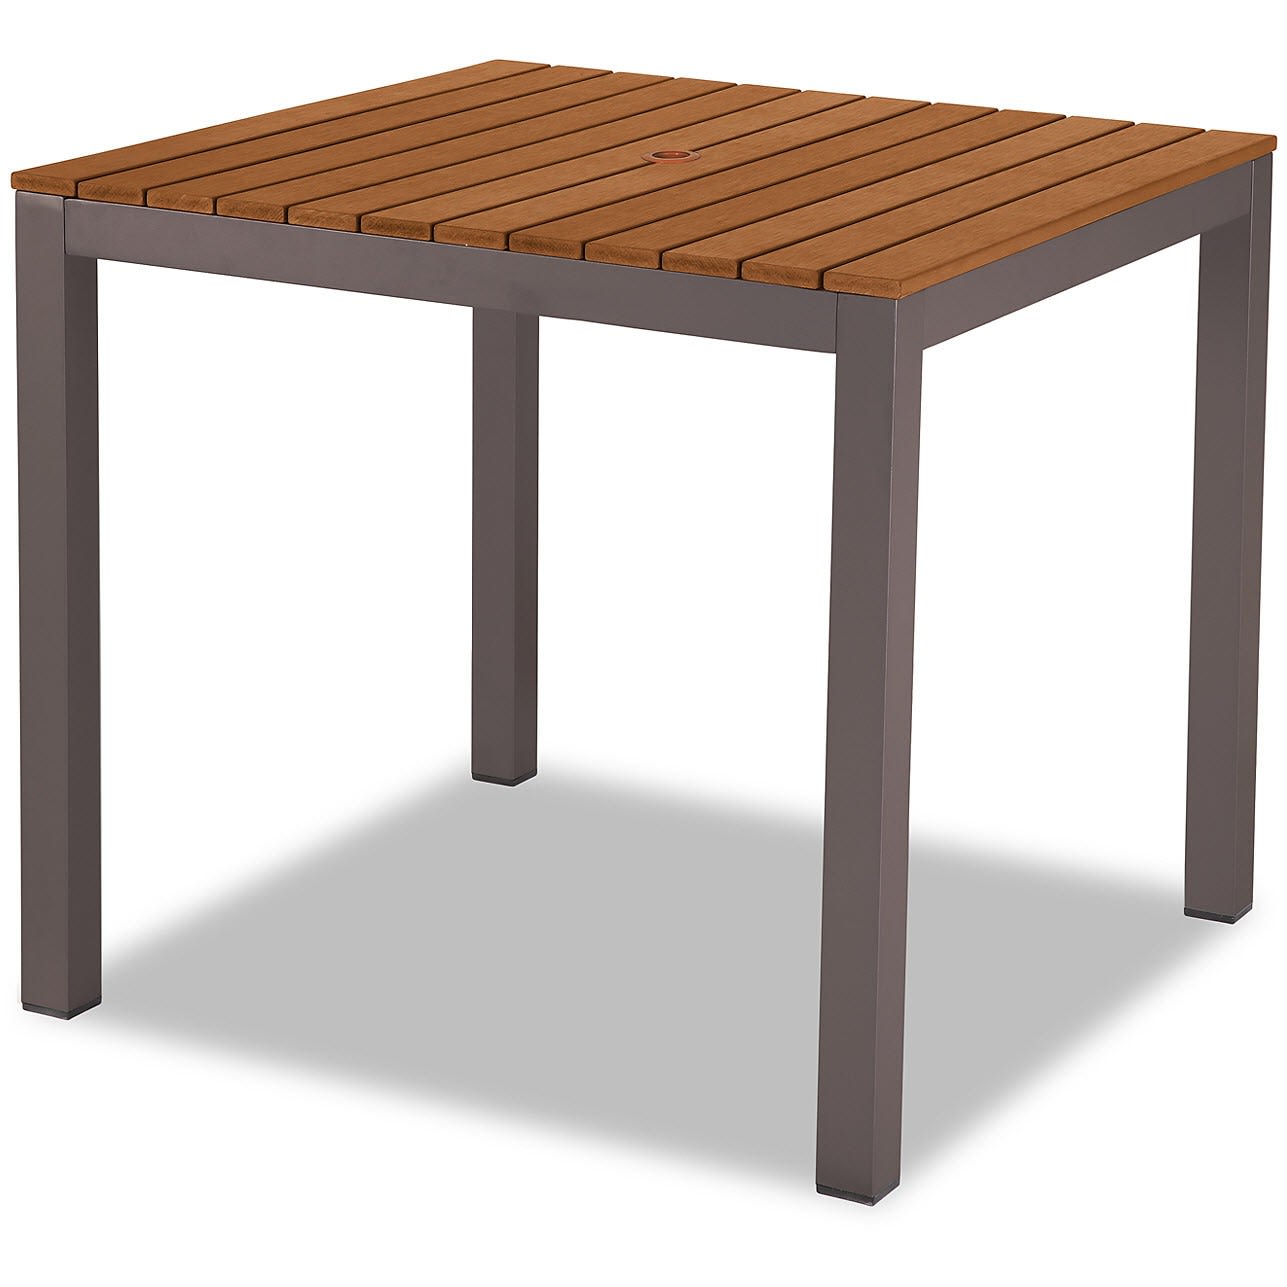 Aluminum Patio Table in Rust Color Finish with Faux Teak Slats